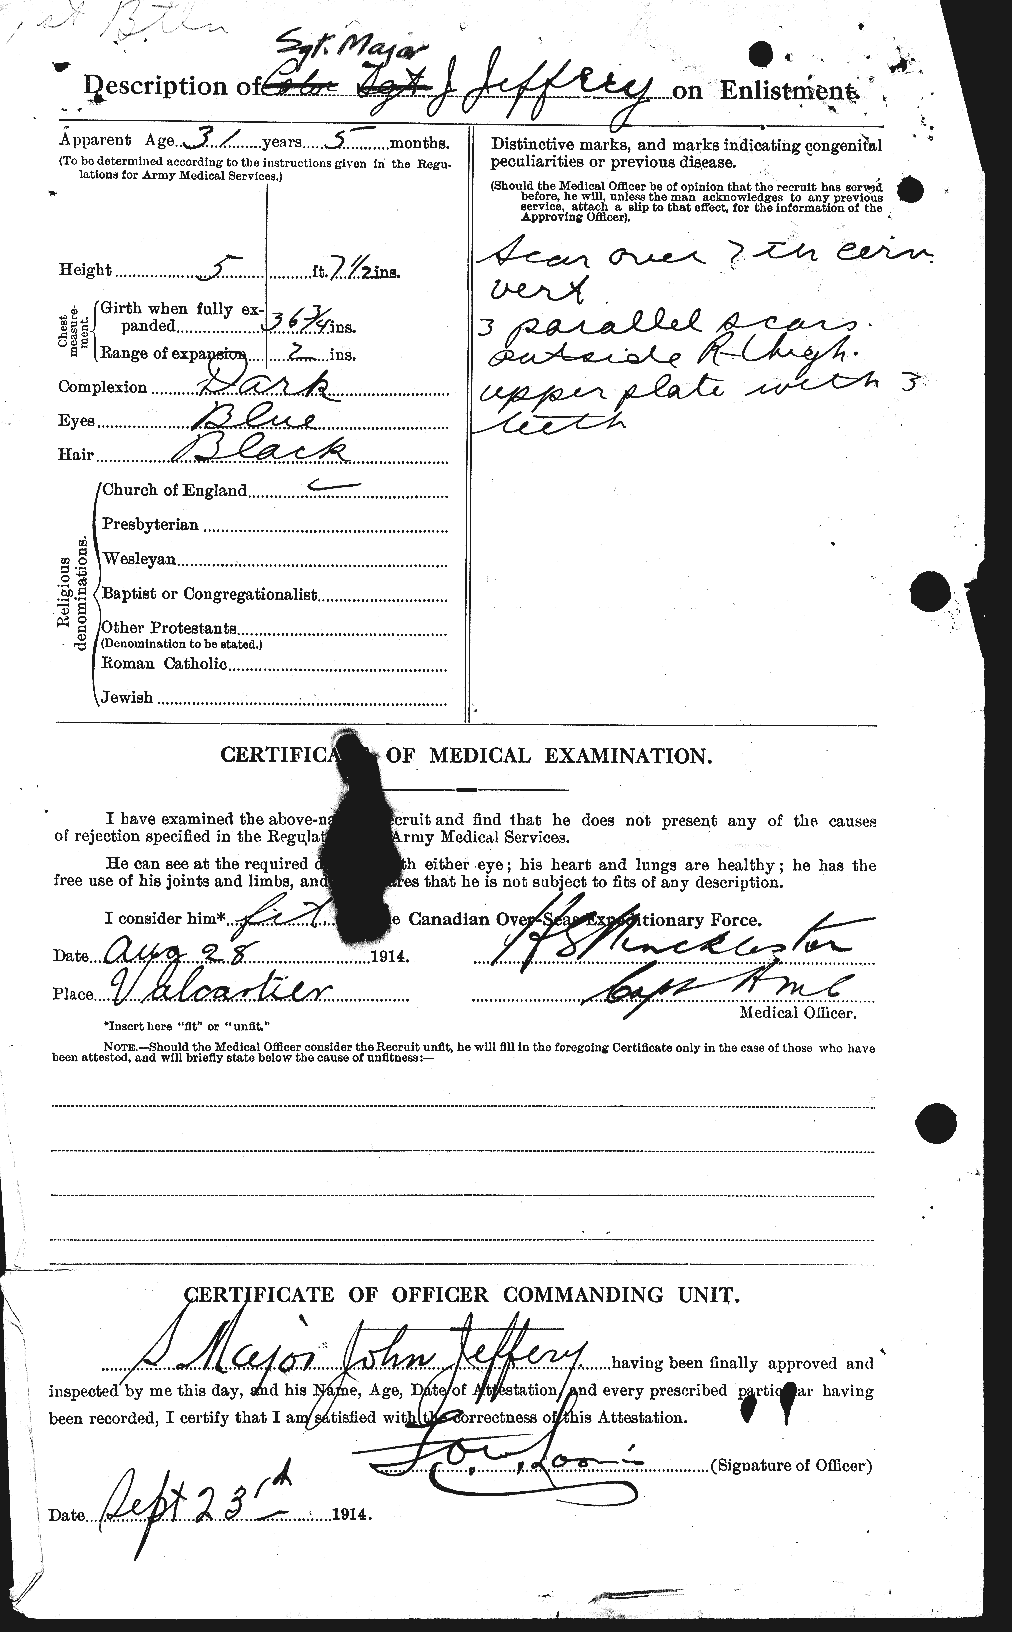 Personnel Records of the First World War - CEF 417773b